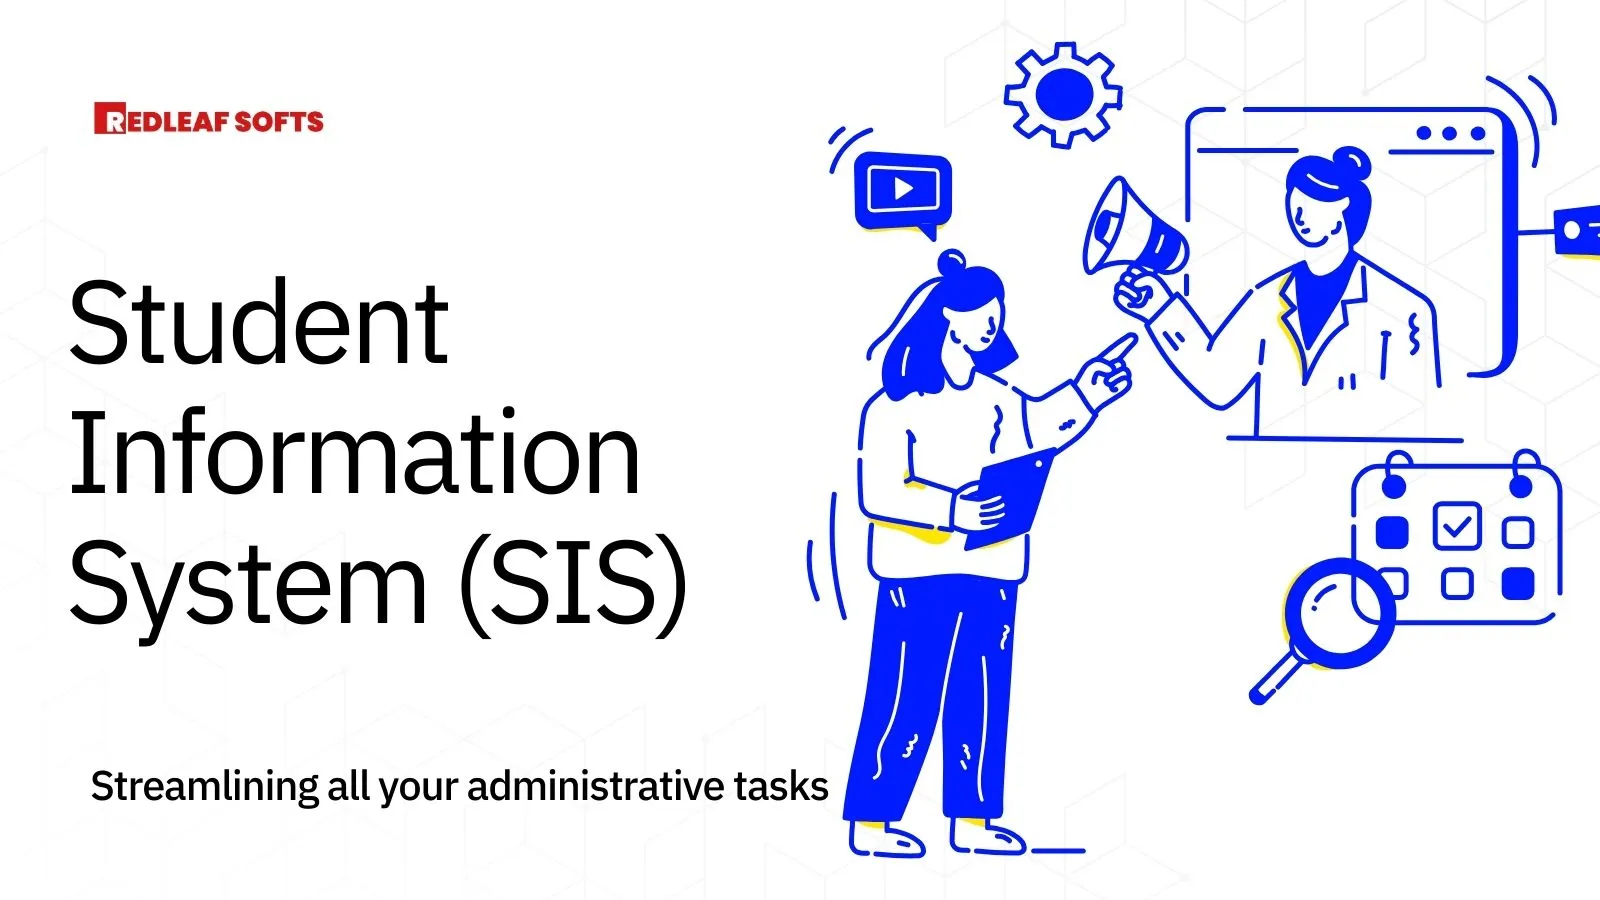 Student Information Systems (SIS): Streamlining Administrative Tasks